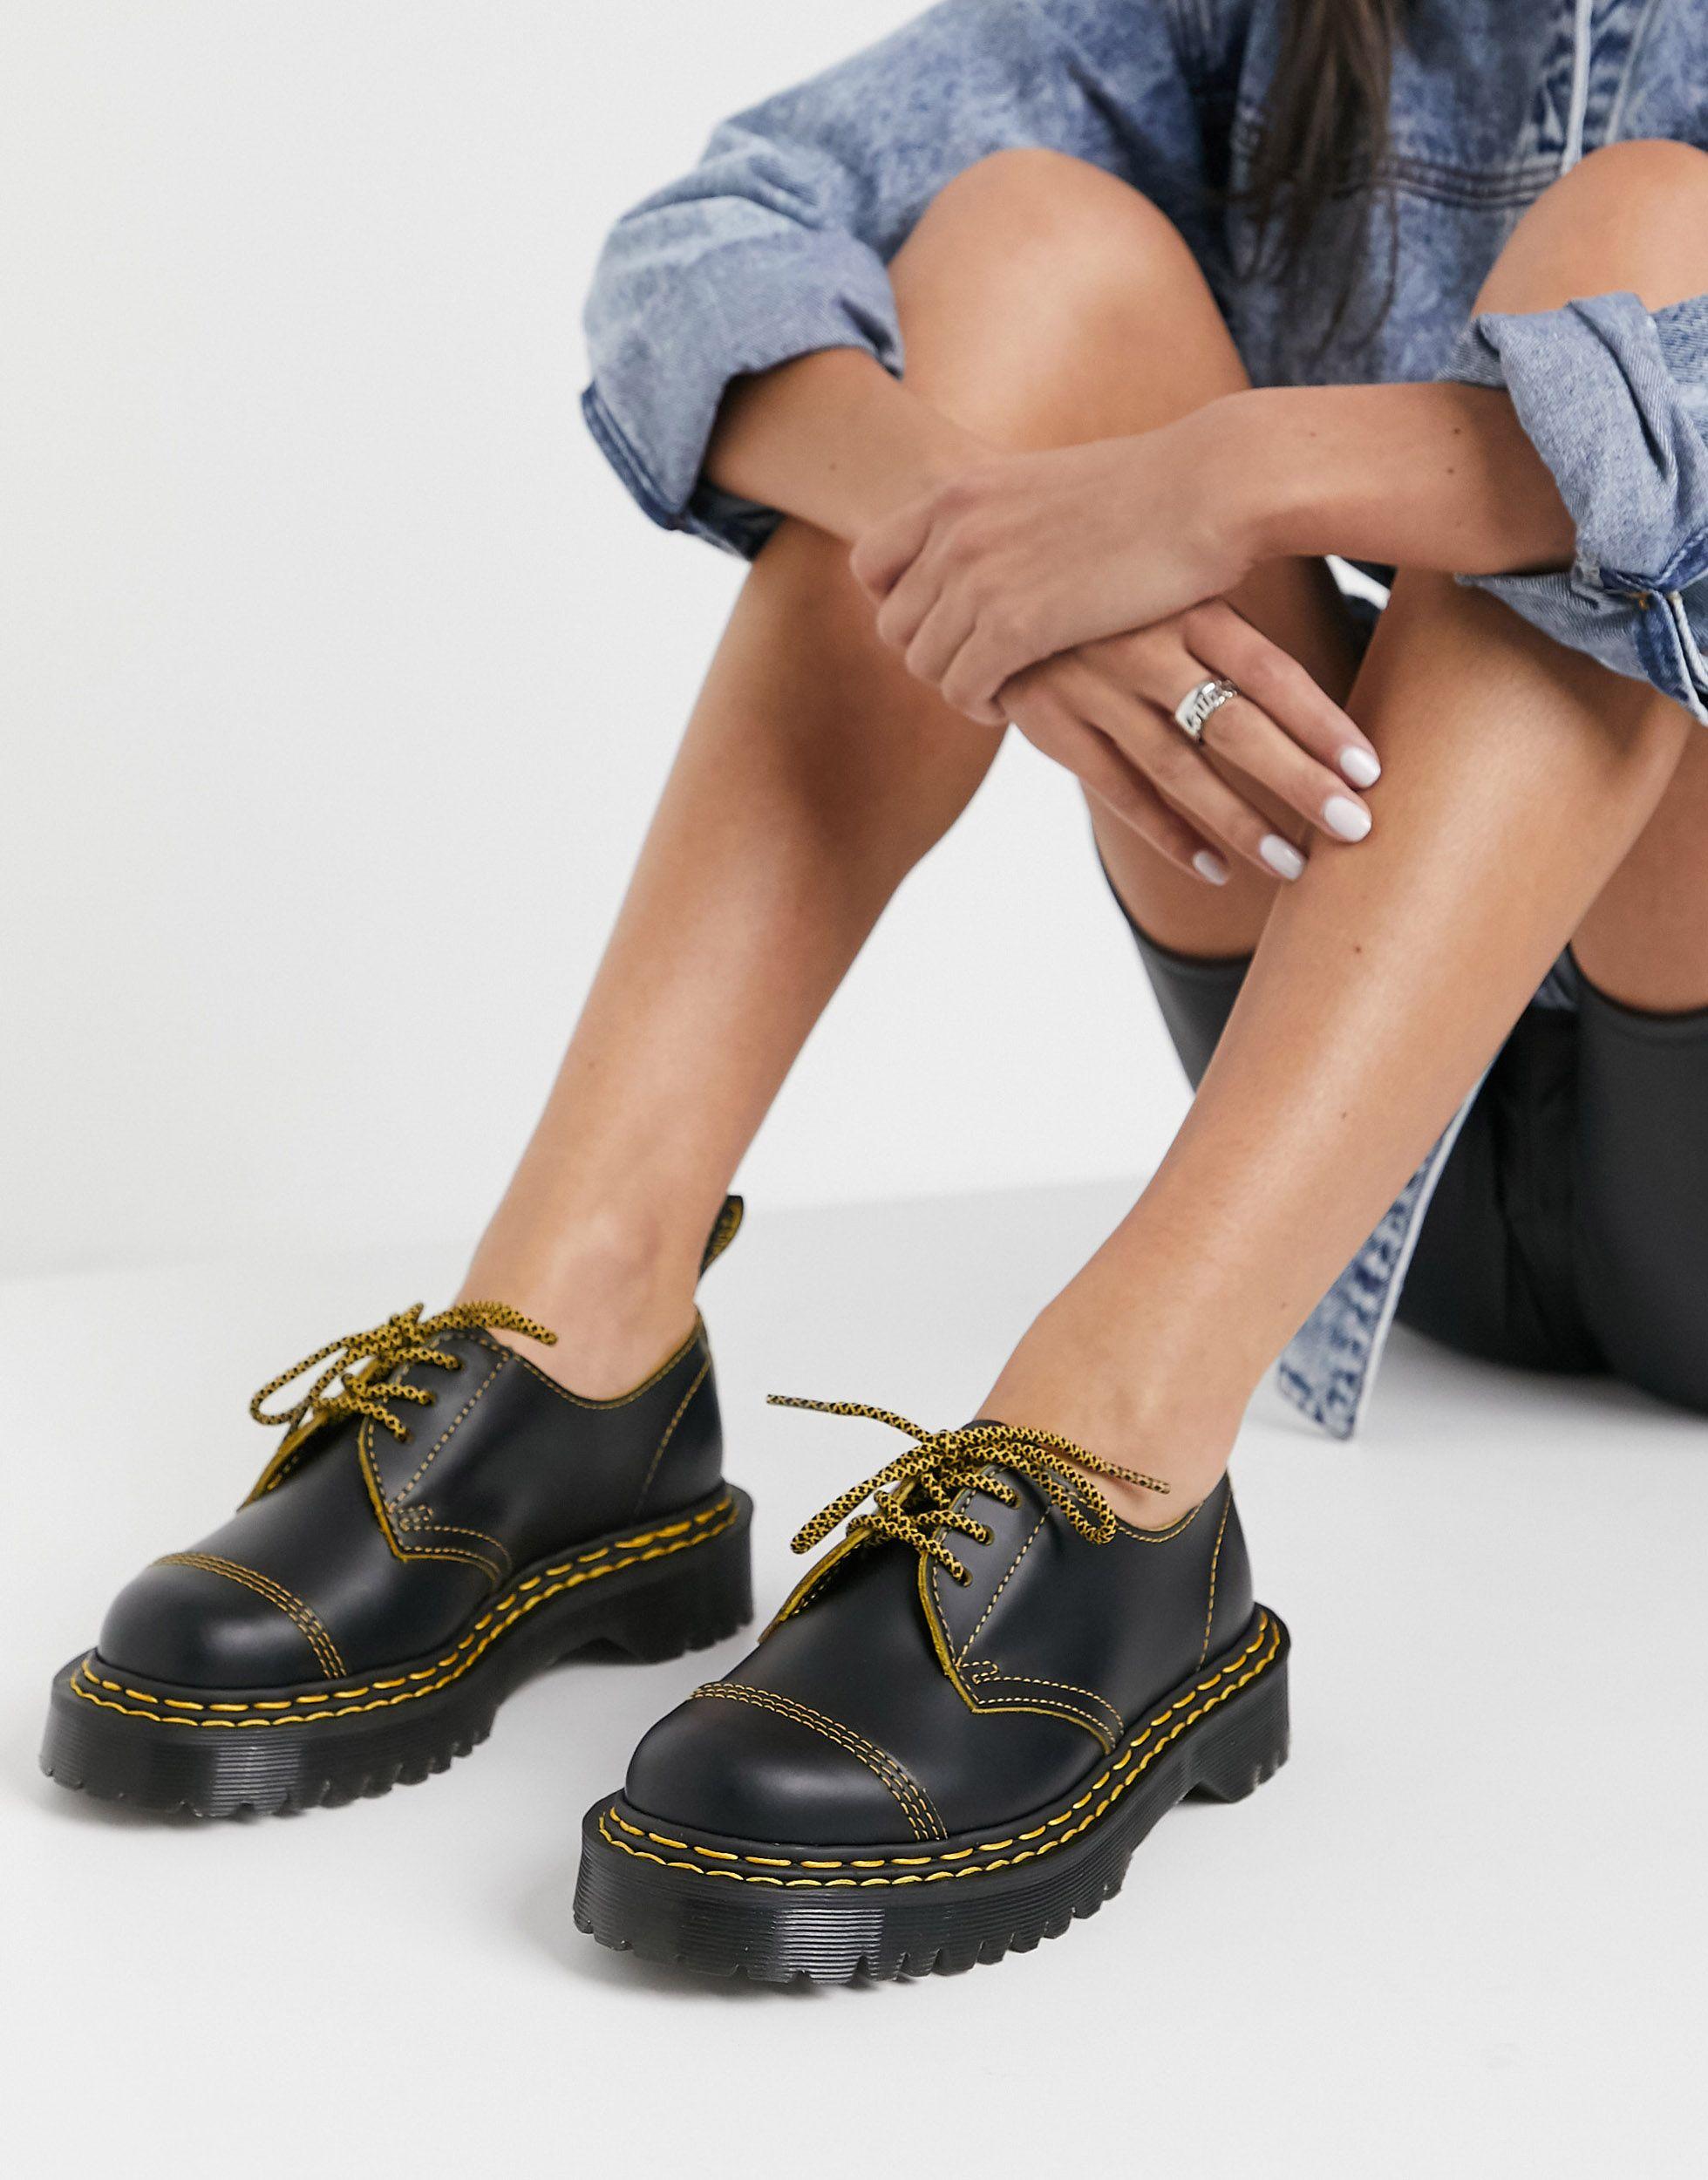 Dr. Martens 1461 Bex Double Stitch Shoes in Black - Lyst